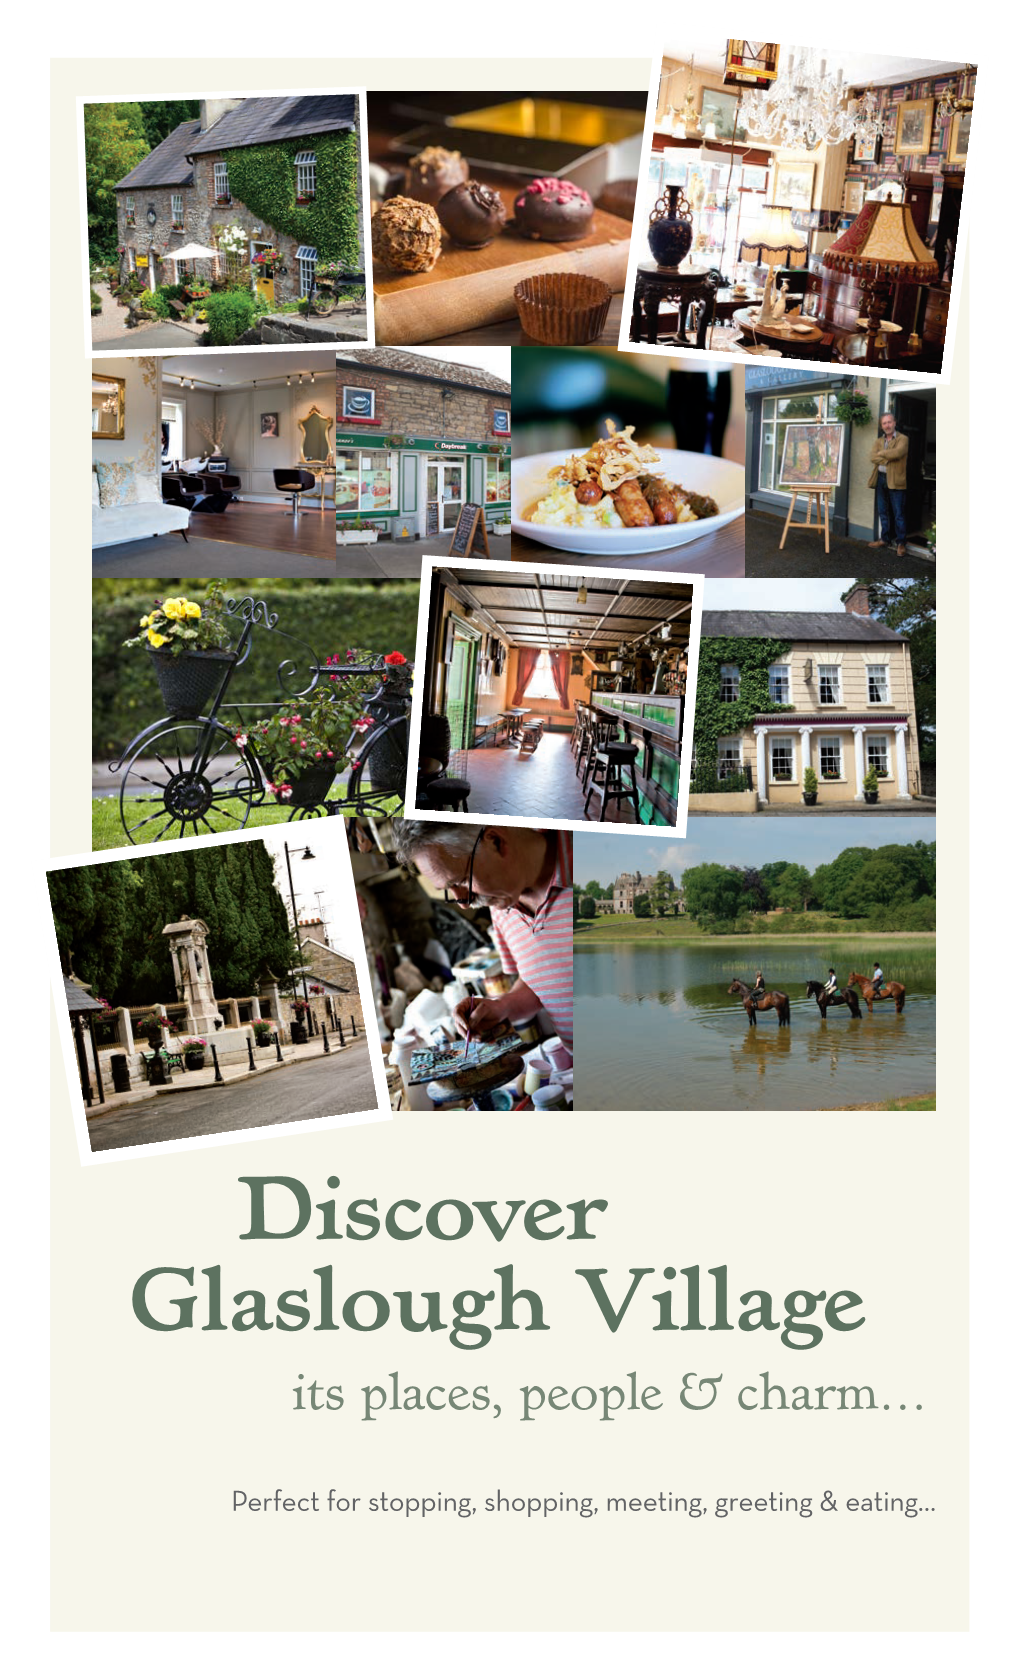 Discover Glaslough Village Its Places, People & Charm…